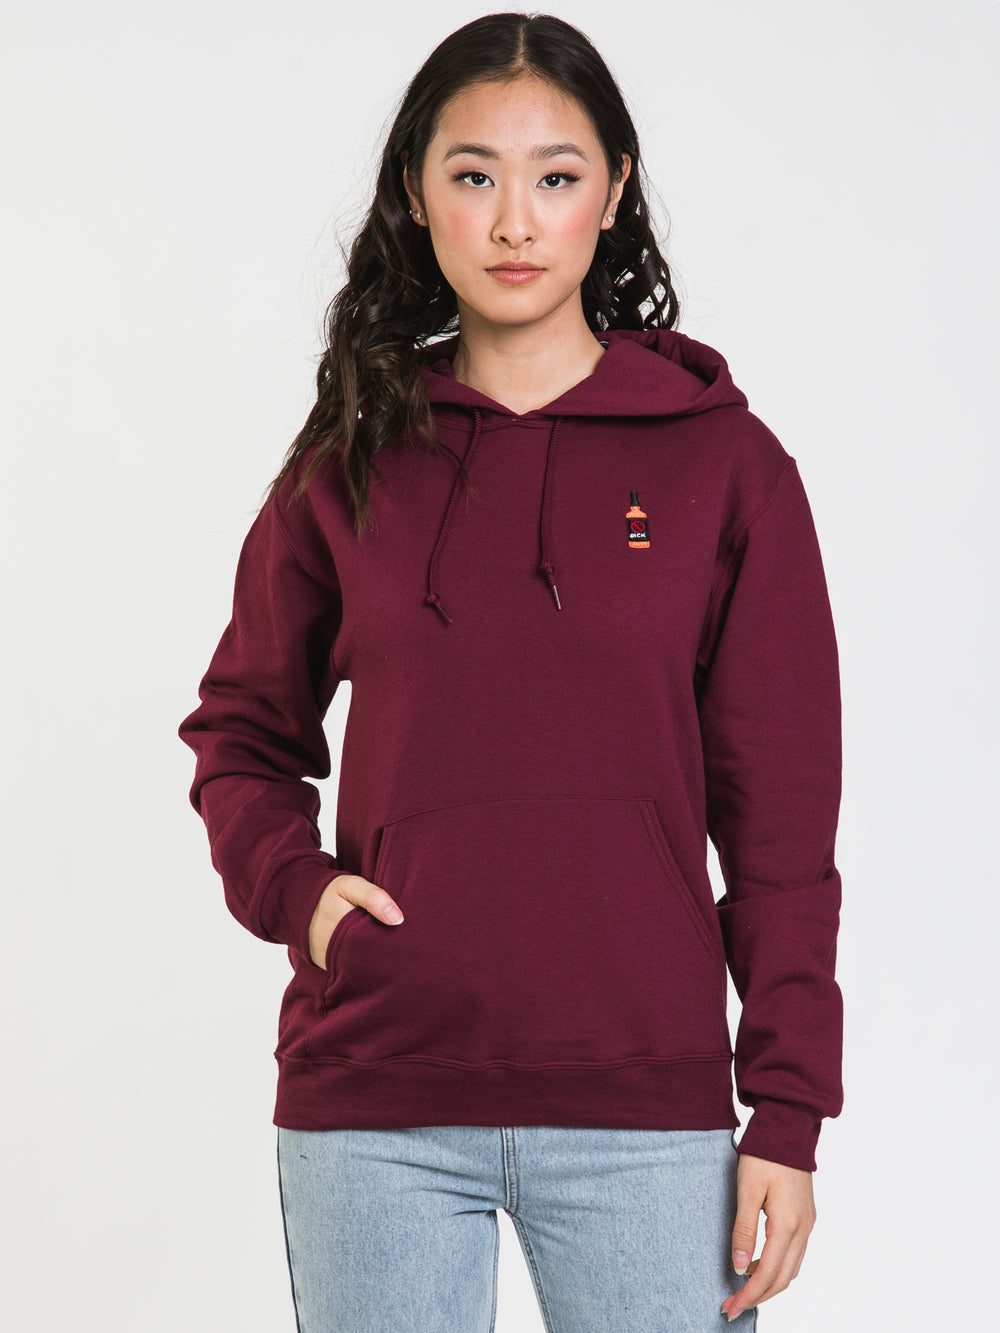 NO WHISKEY HOODIE - CLEARANCE